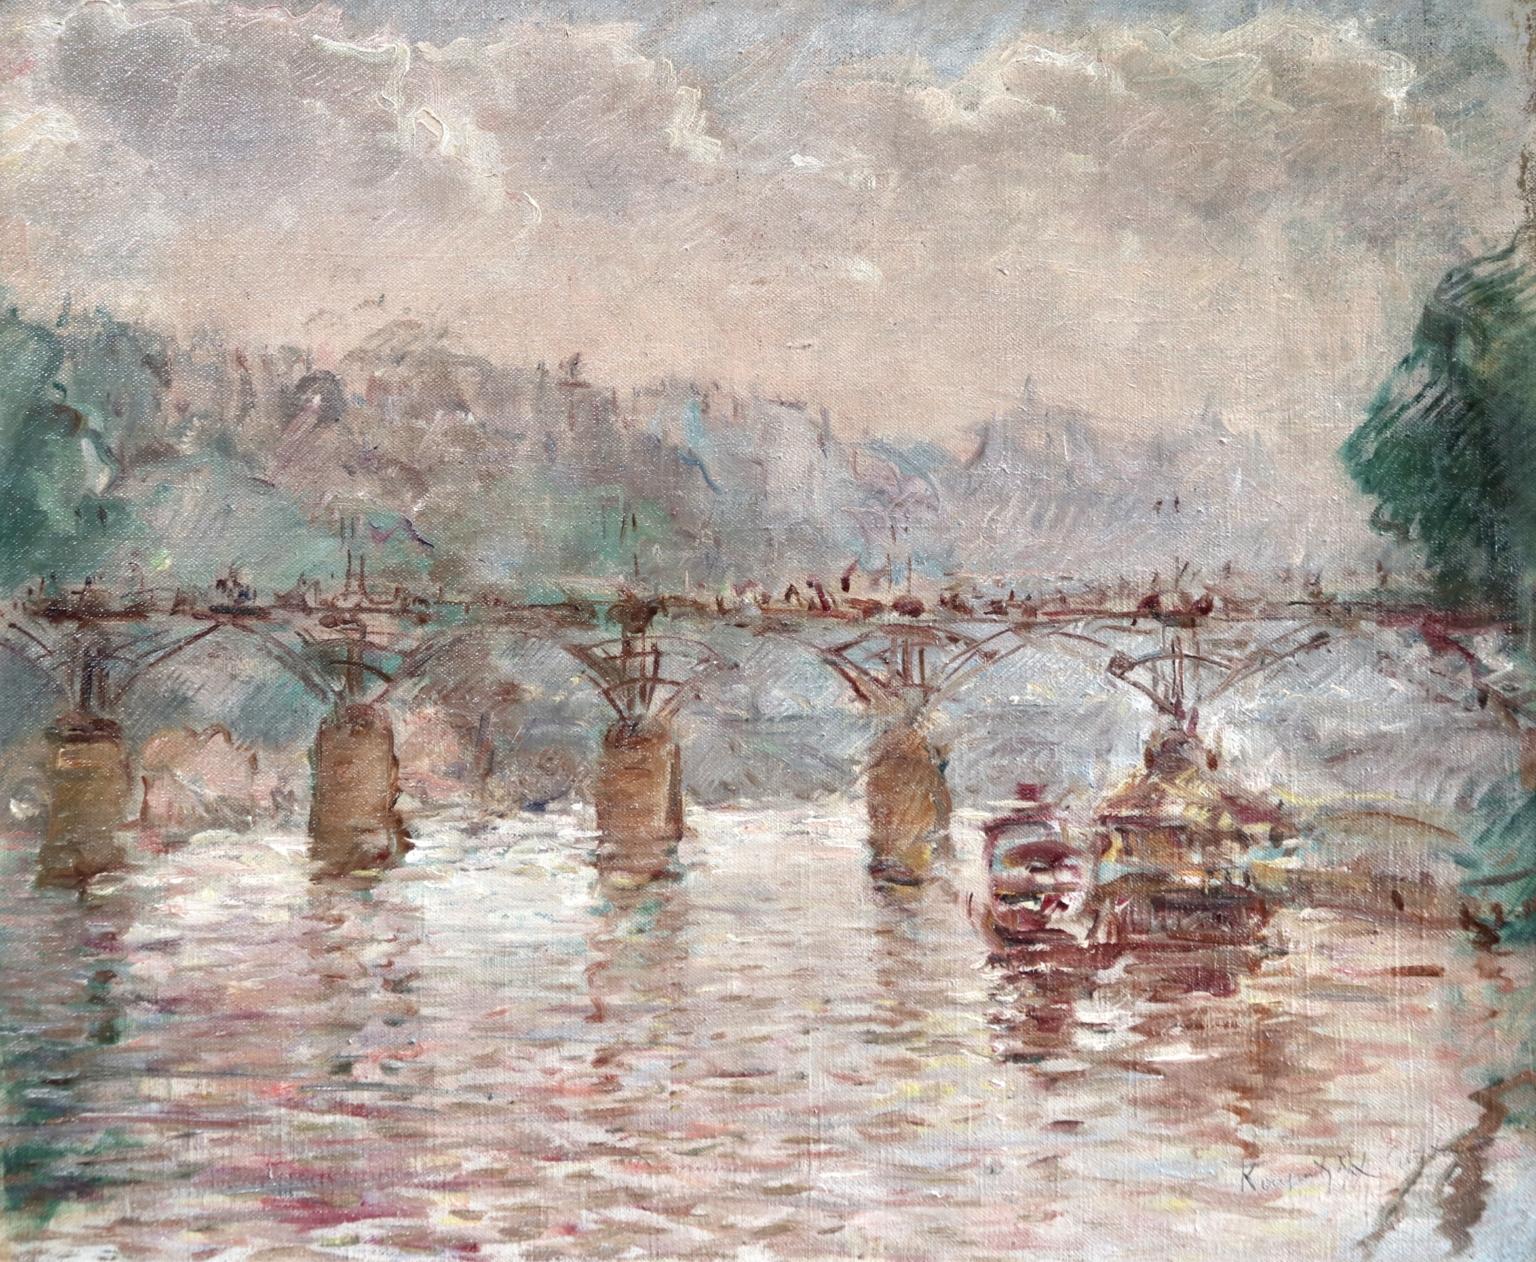 A beautifully painted oil on canvas by Russian painter Constantin Kousnetsoff depicting boats sailing along the River Seine, Paris under the Ponts des Arts bridge on a cloudy day. Signed lower right. Framed dimensions are 31 inches high by 36 inches